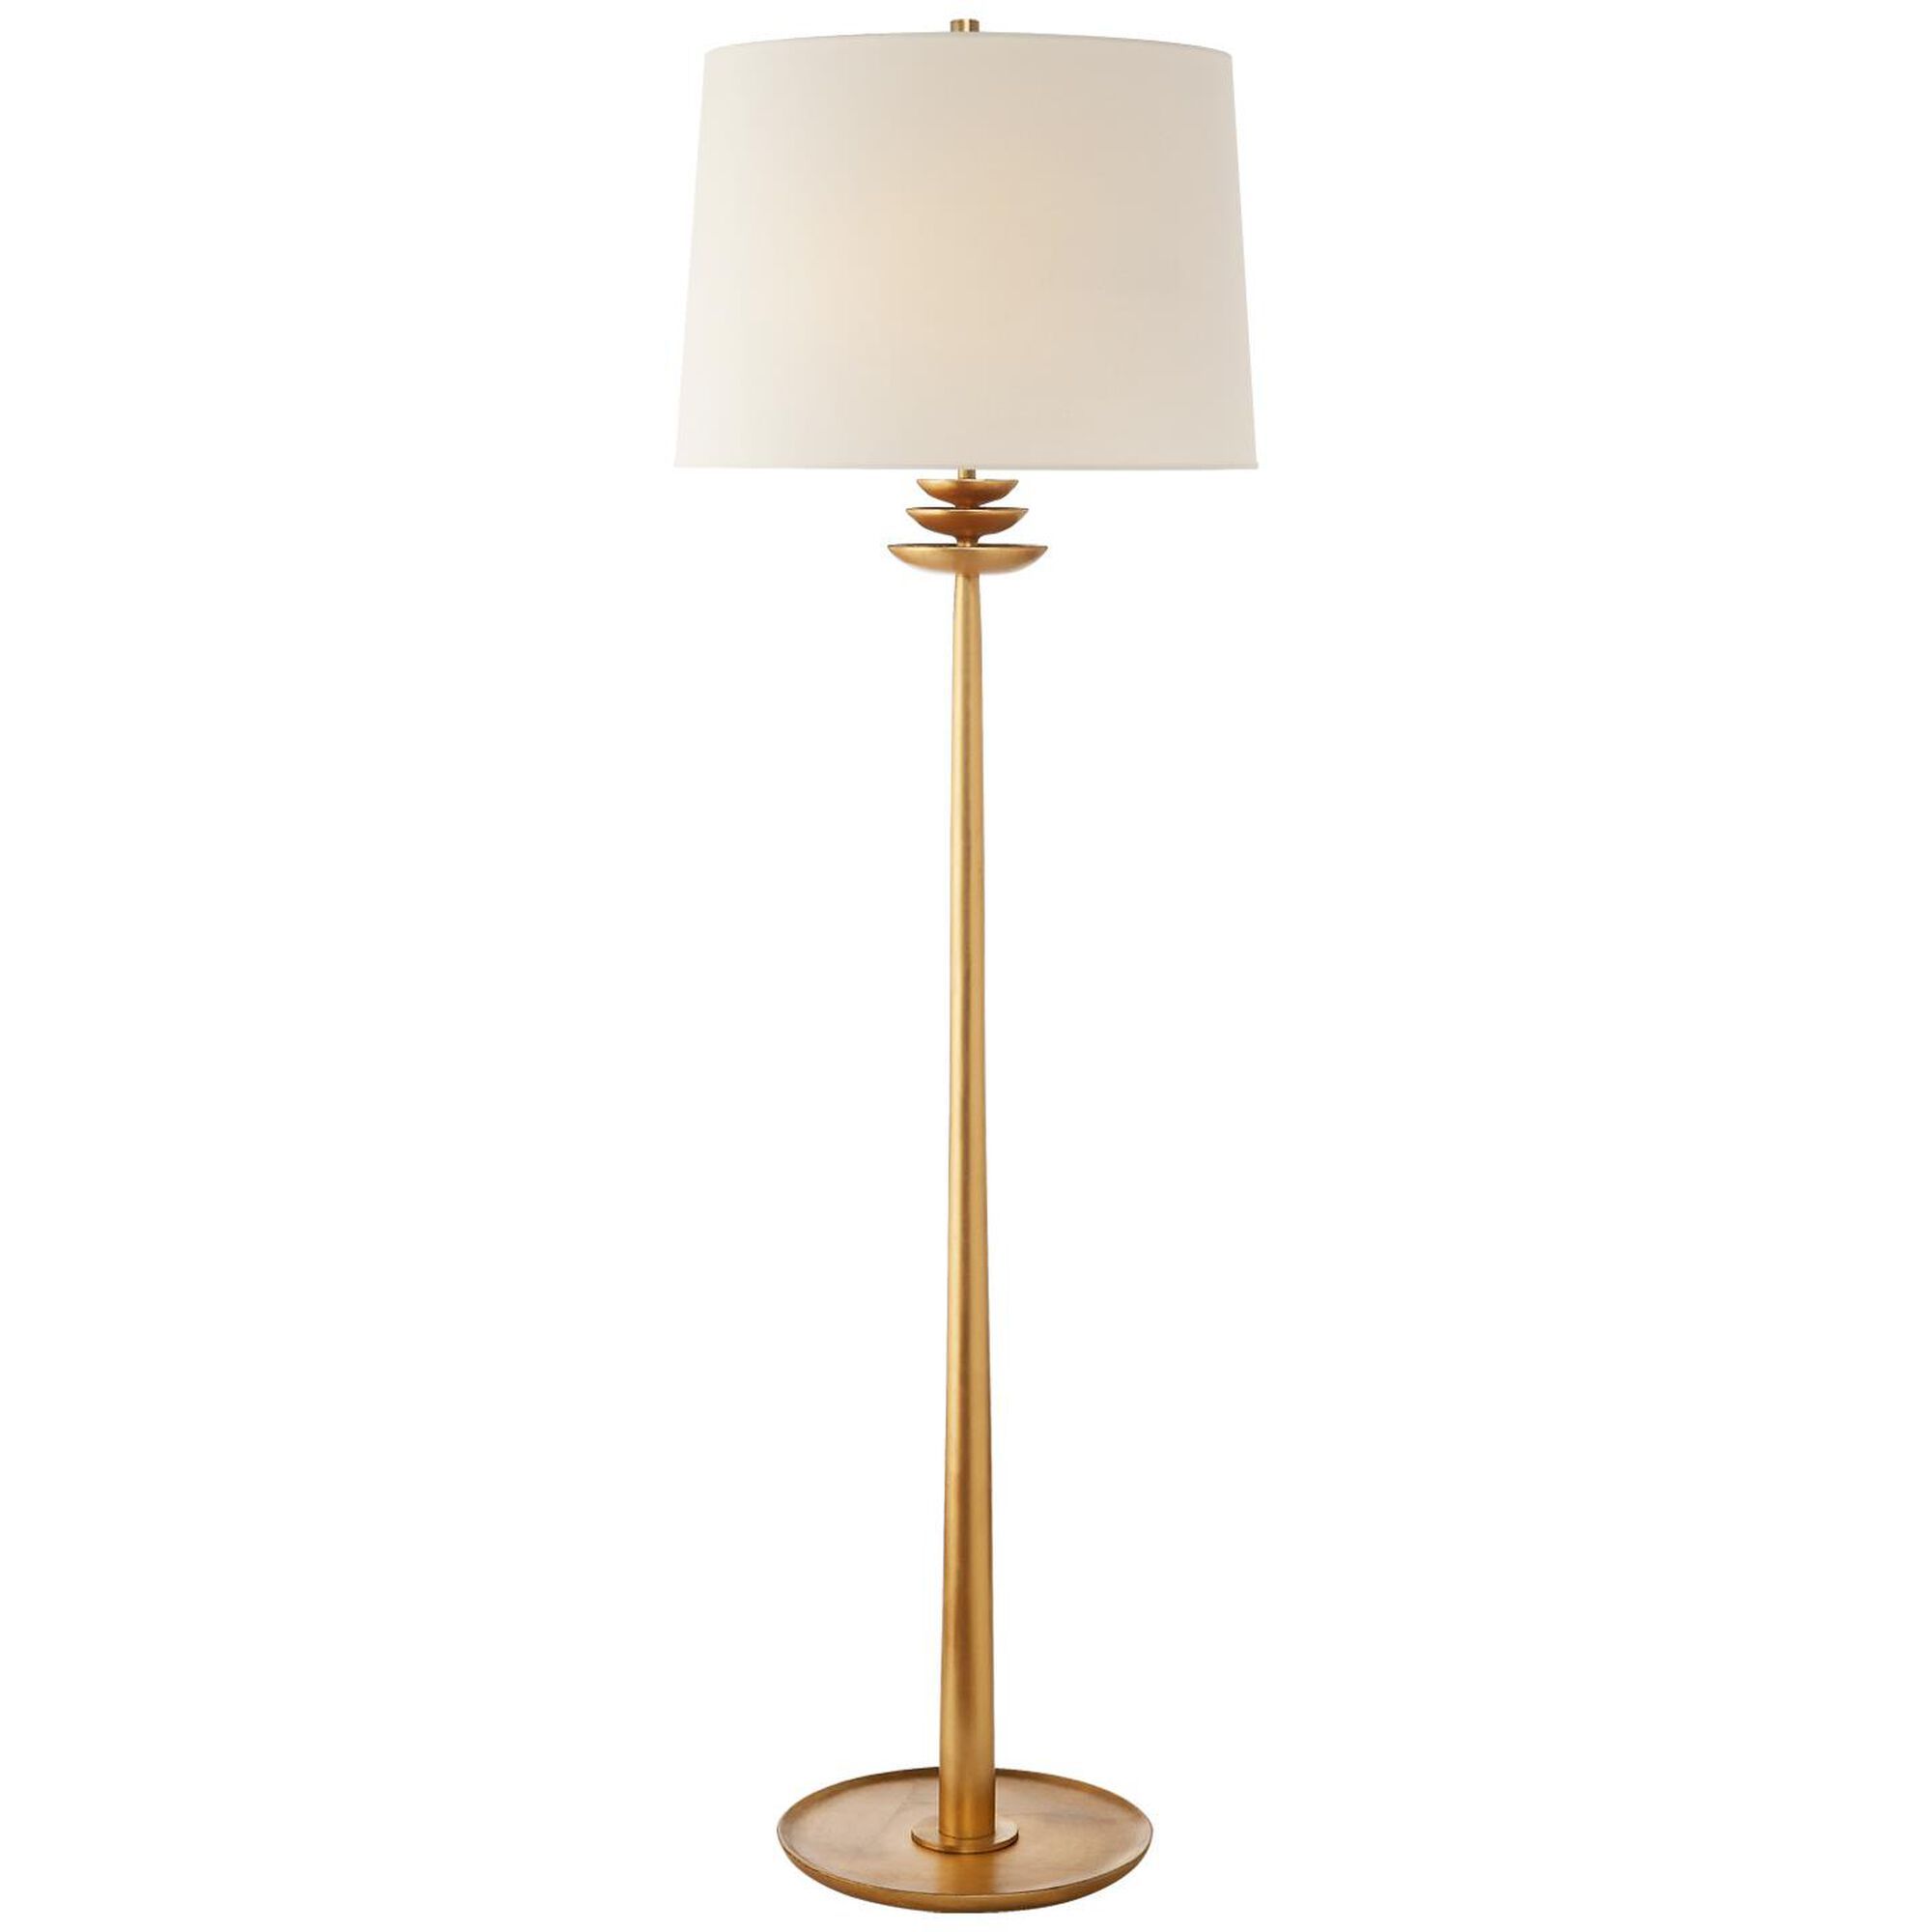 New




Aerin Beaumont 62 Inch Floor Lamp by Visual Comfort and Co.

Capitol ID: 2189491
MFR SKU:... | Capitol Lighting 1800lighting.com